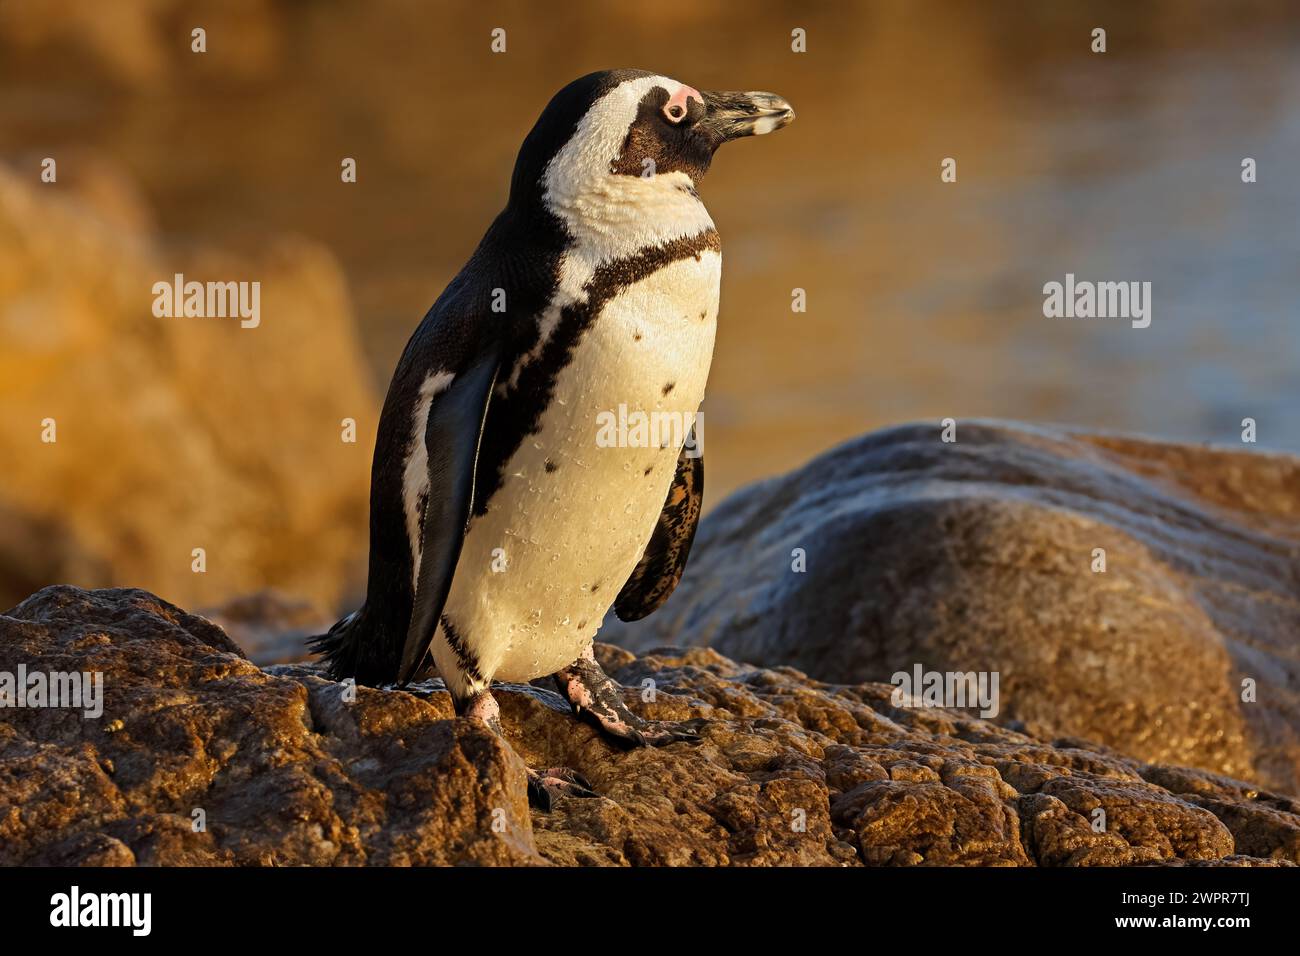 An African penguin (Spheniscus demersus) sitting on a coastal rock, South Africa Stock Photo